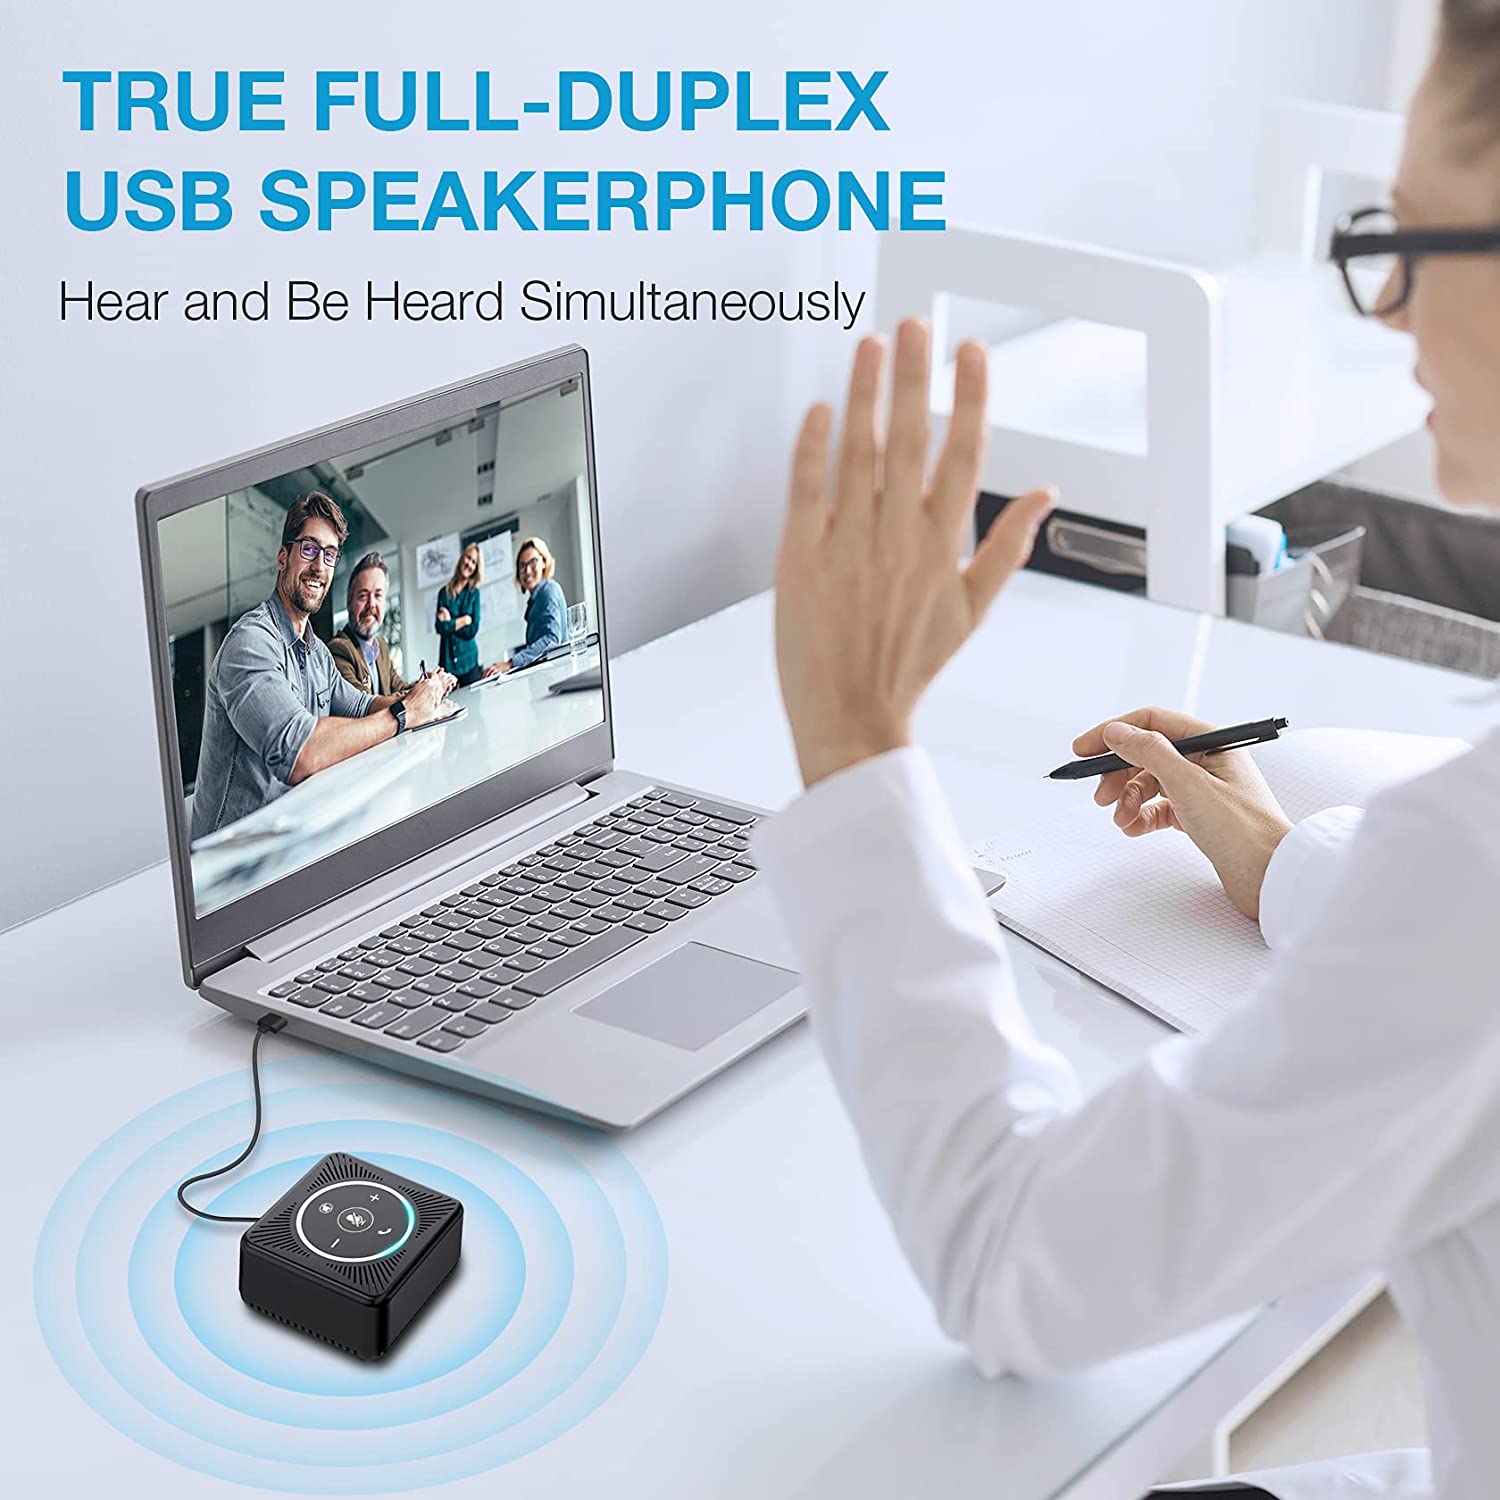 Emeet USB Speakerphone, M0 Conference Speaker for Small Business Conference with 4 People 360° Voice Pickup 4 AI Mics Speakerphone